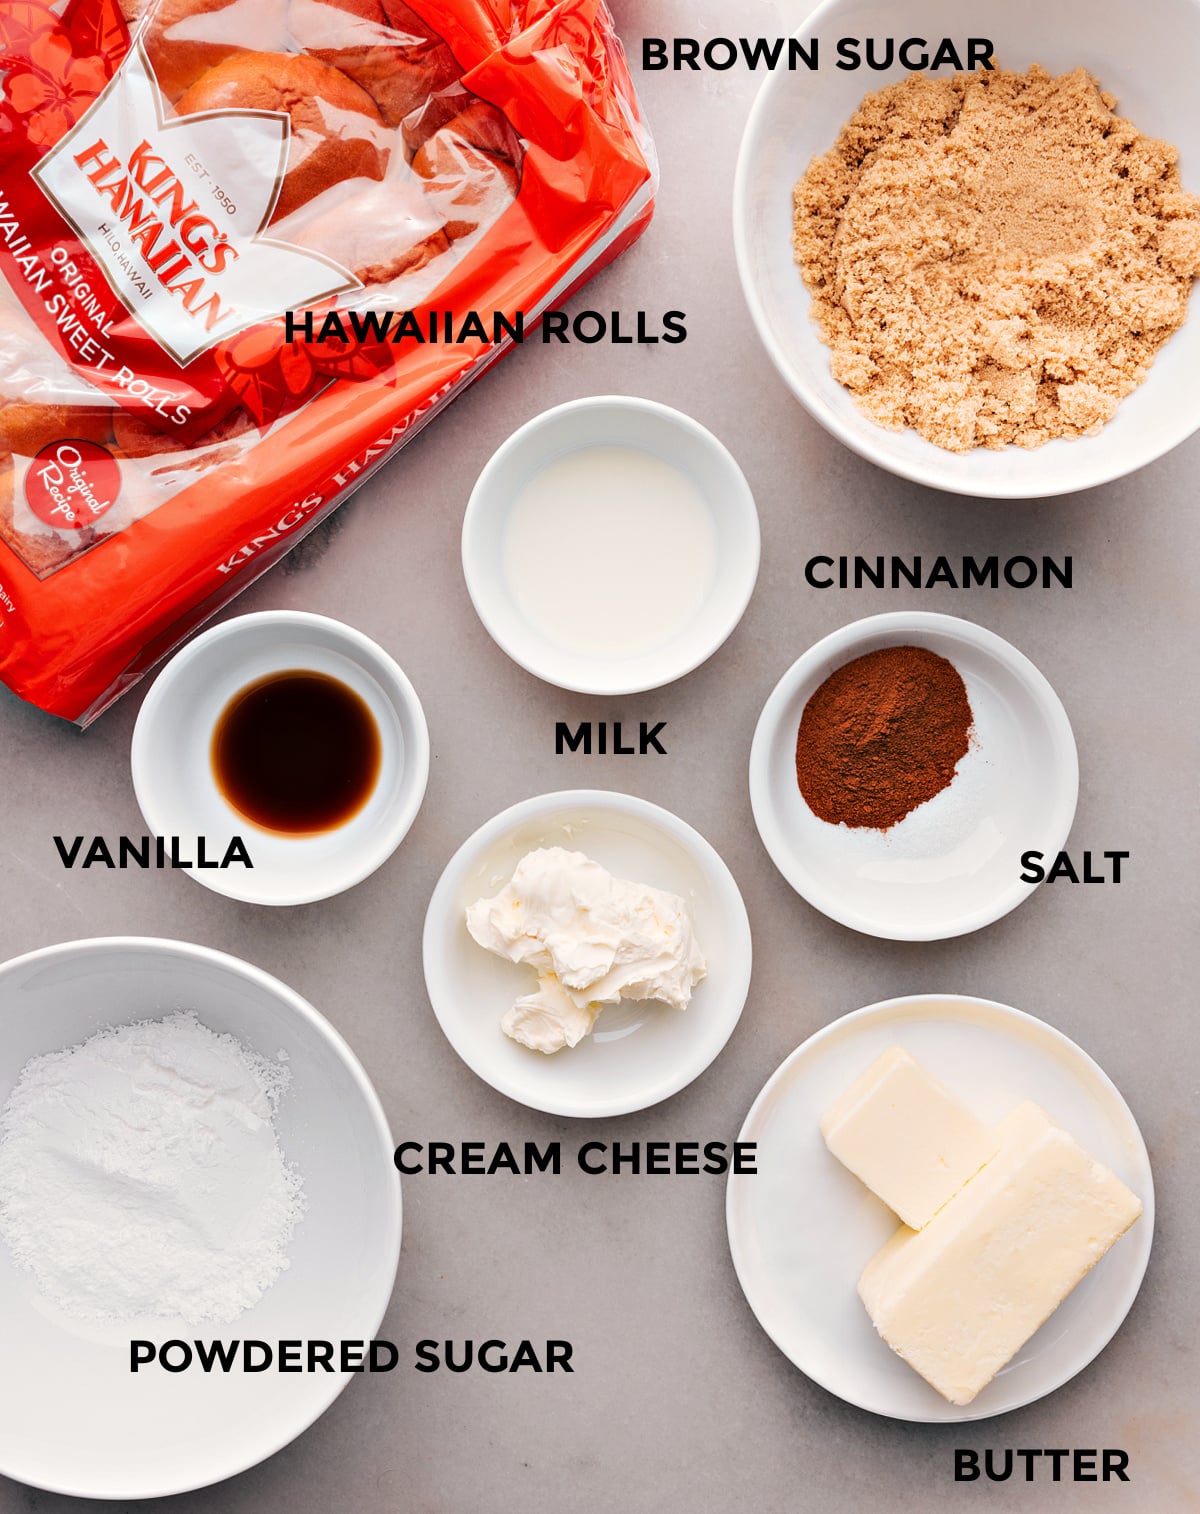 Image showing all the ingredients in this recipe prepped out for easy assembly.